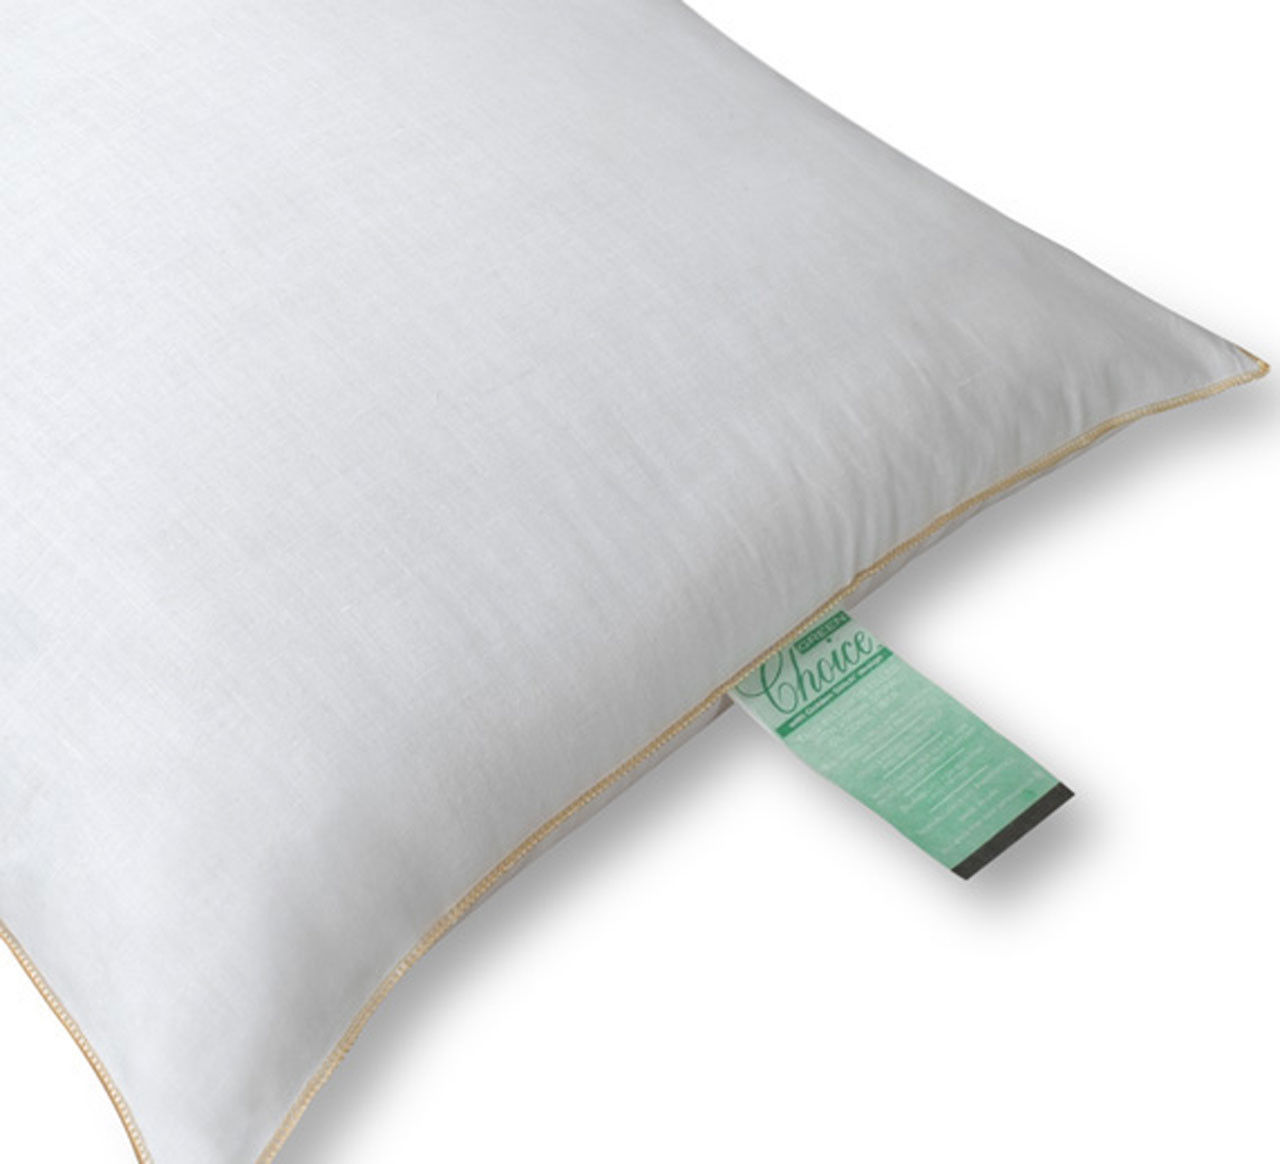 Can you tell me what the filling material is for Green Choice Pillows?